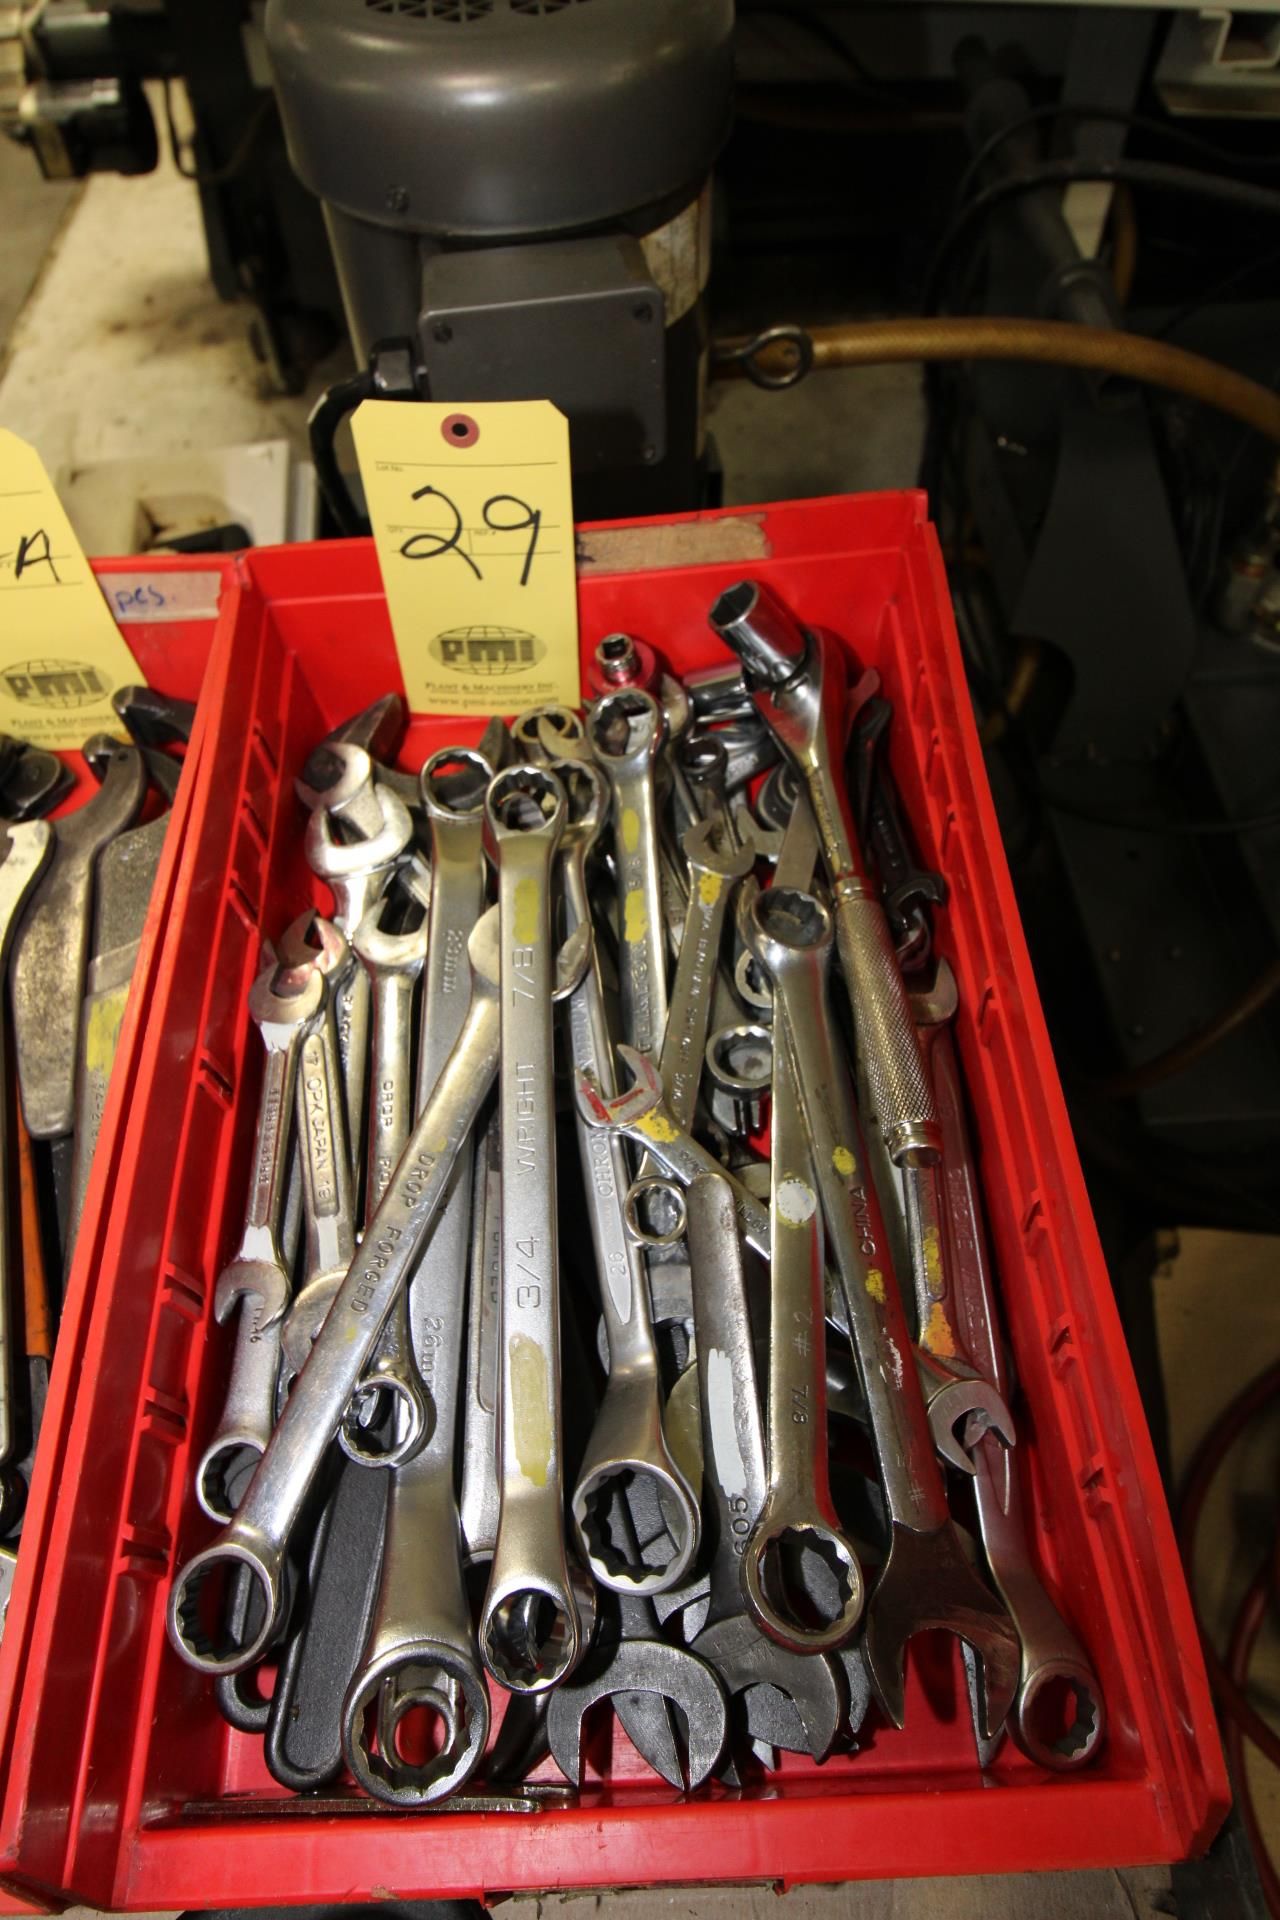 LOT CONSISTING OF: wrenches, open end & close end, 24" crescent wrench